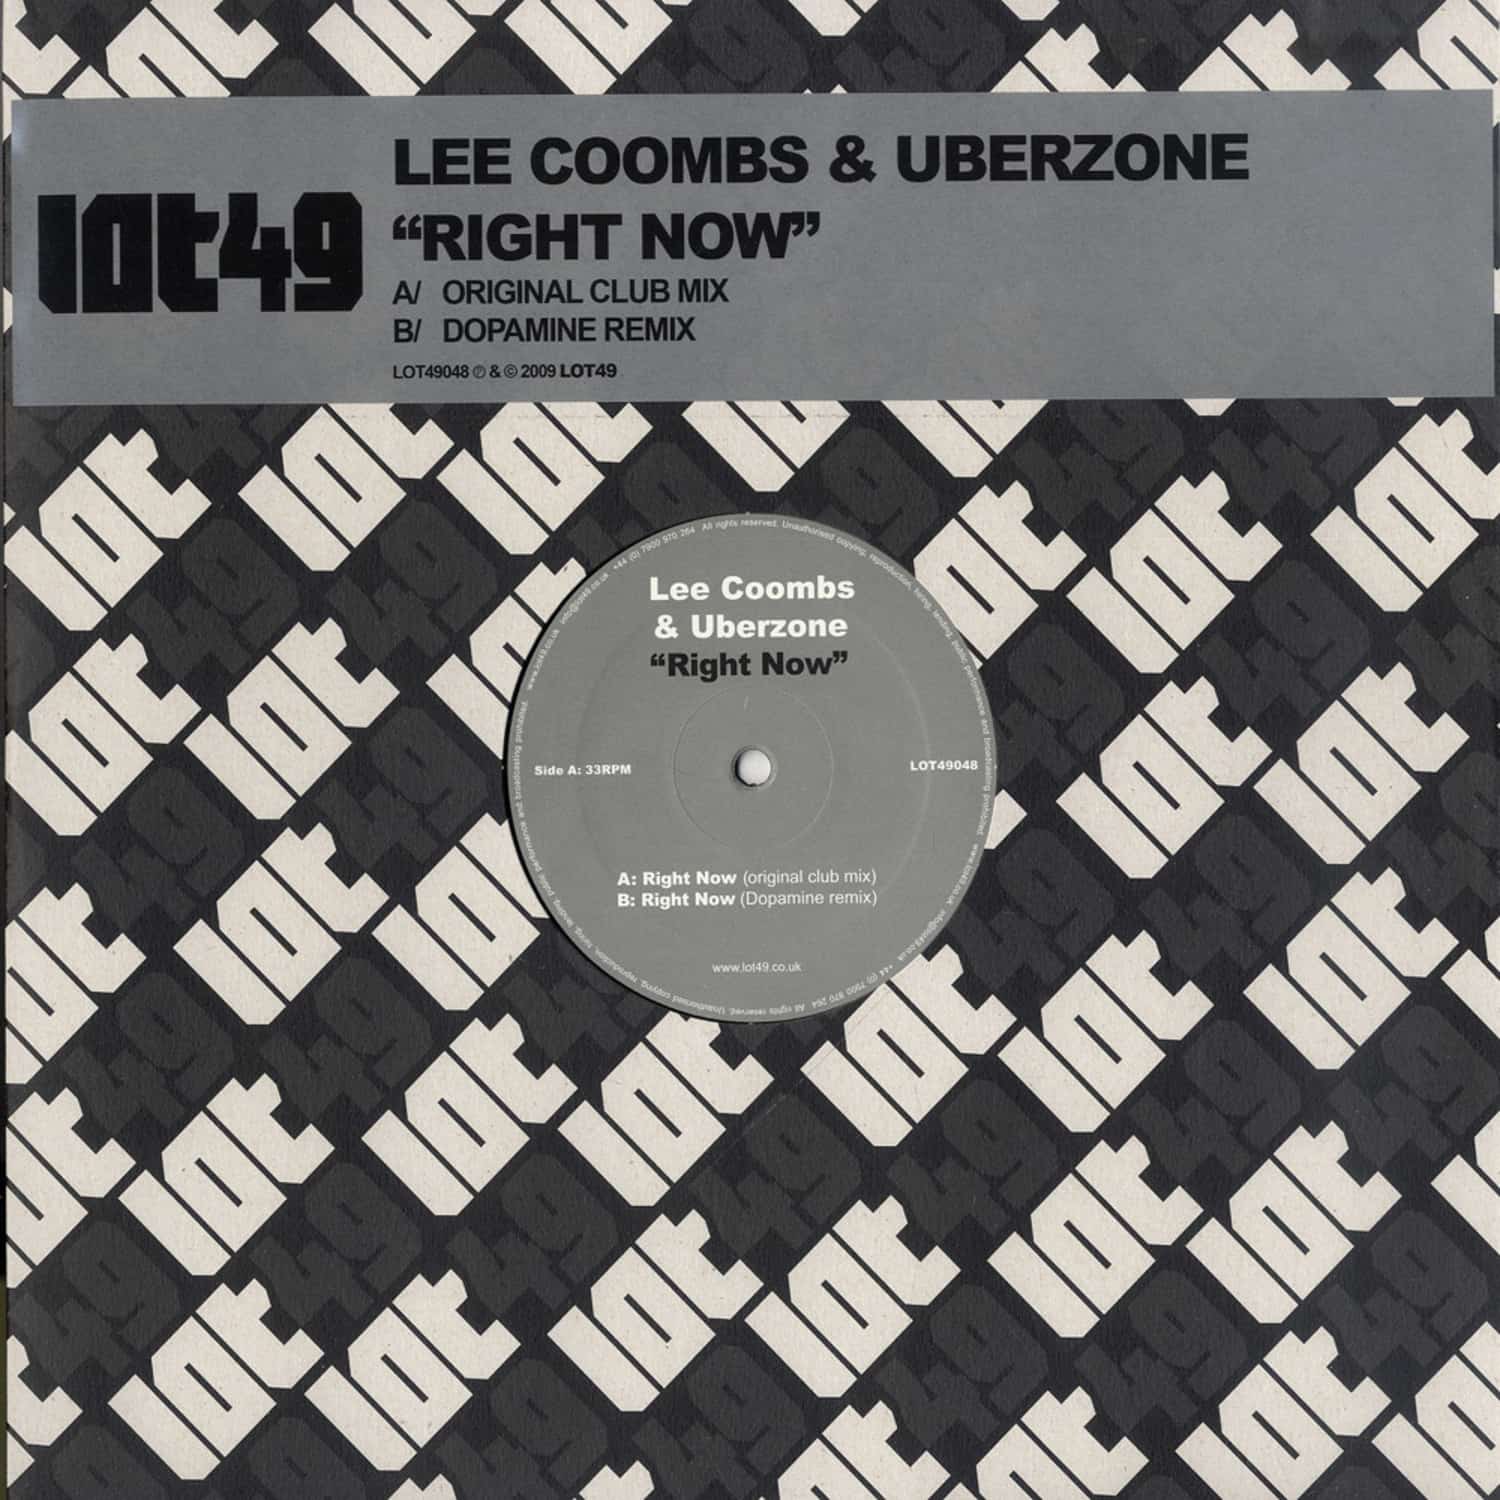 Lee Coombs & Uberzone - RIGHT NOW